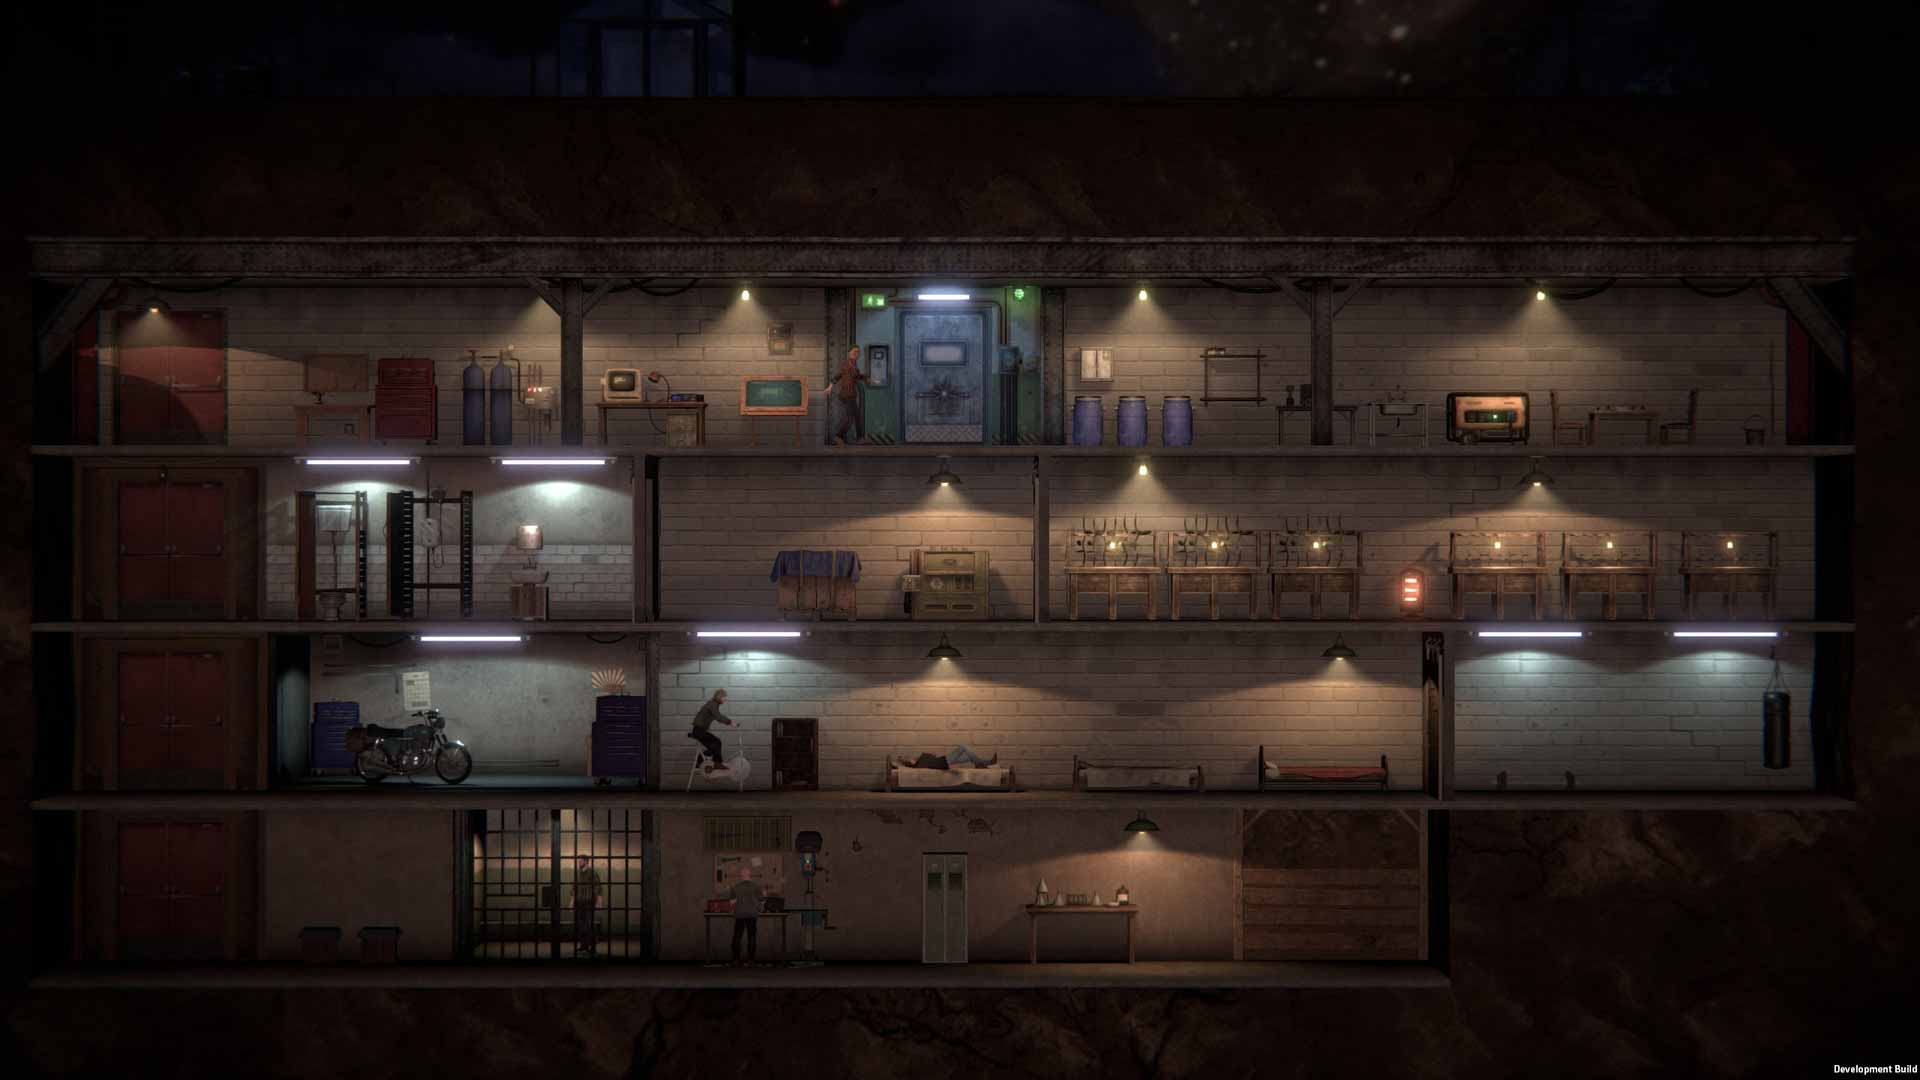 Sheltered 2 Release Date Announced